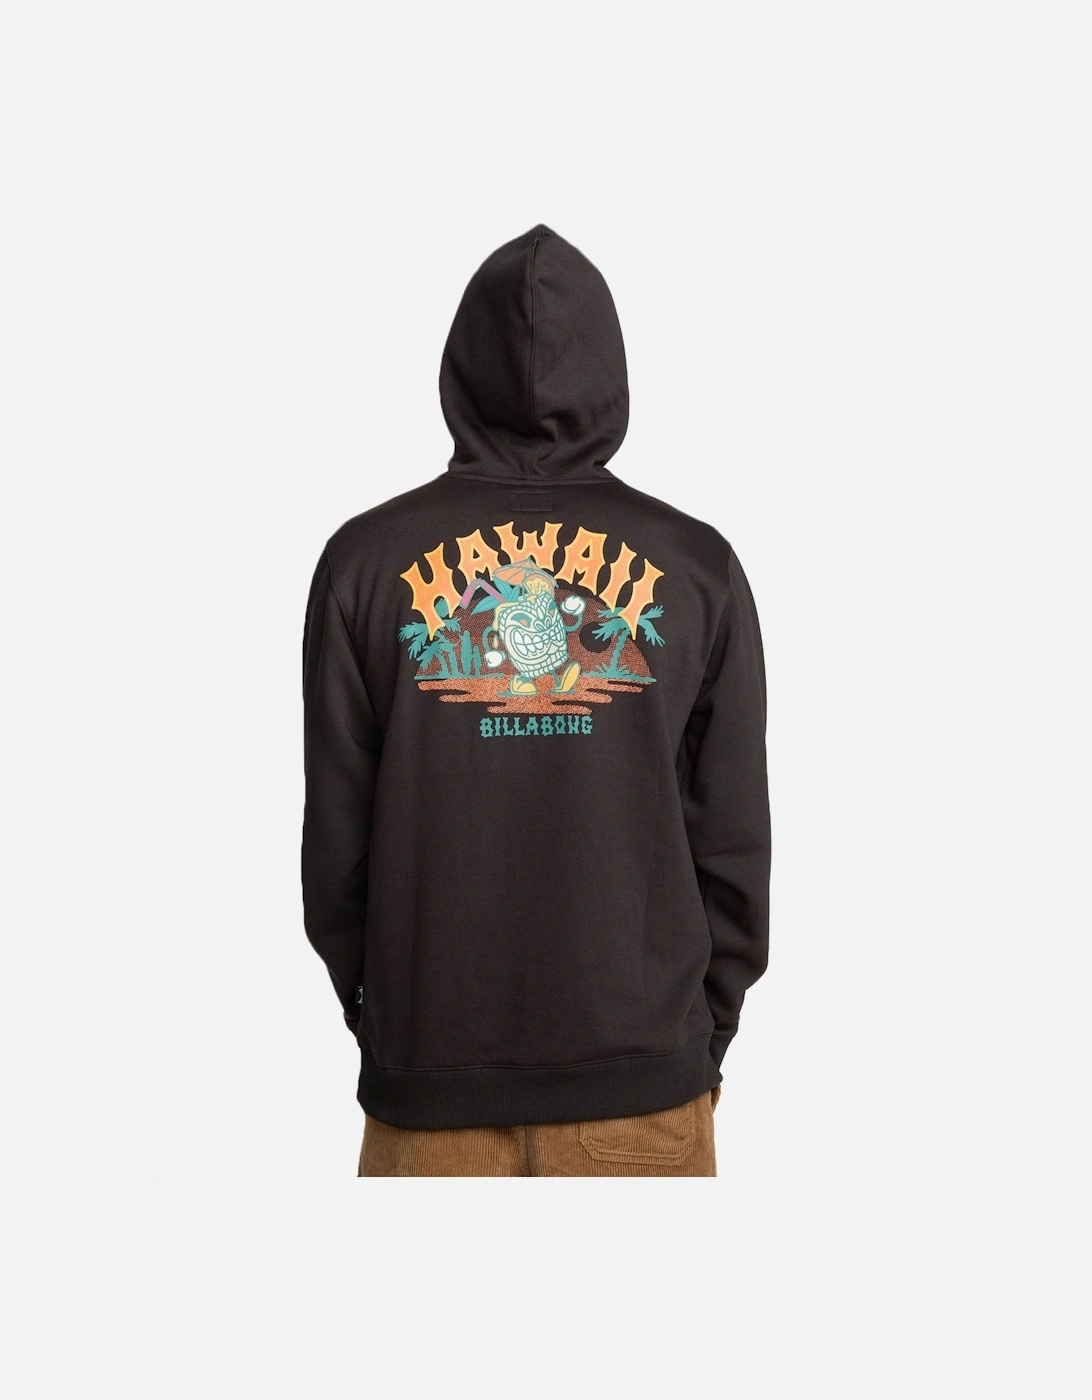 Mens Arch Dreamy Place Hoodie, 11 of 10